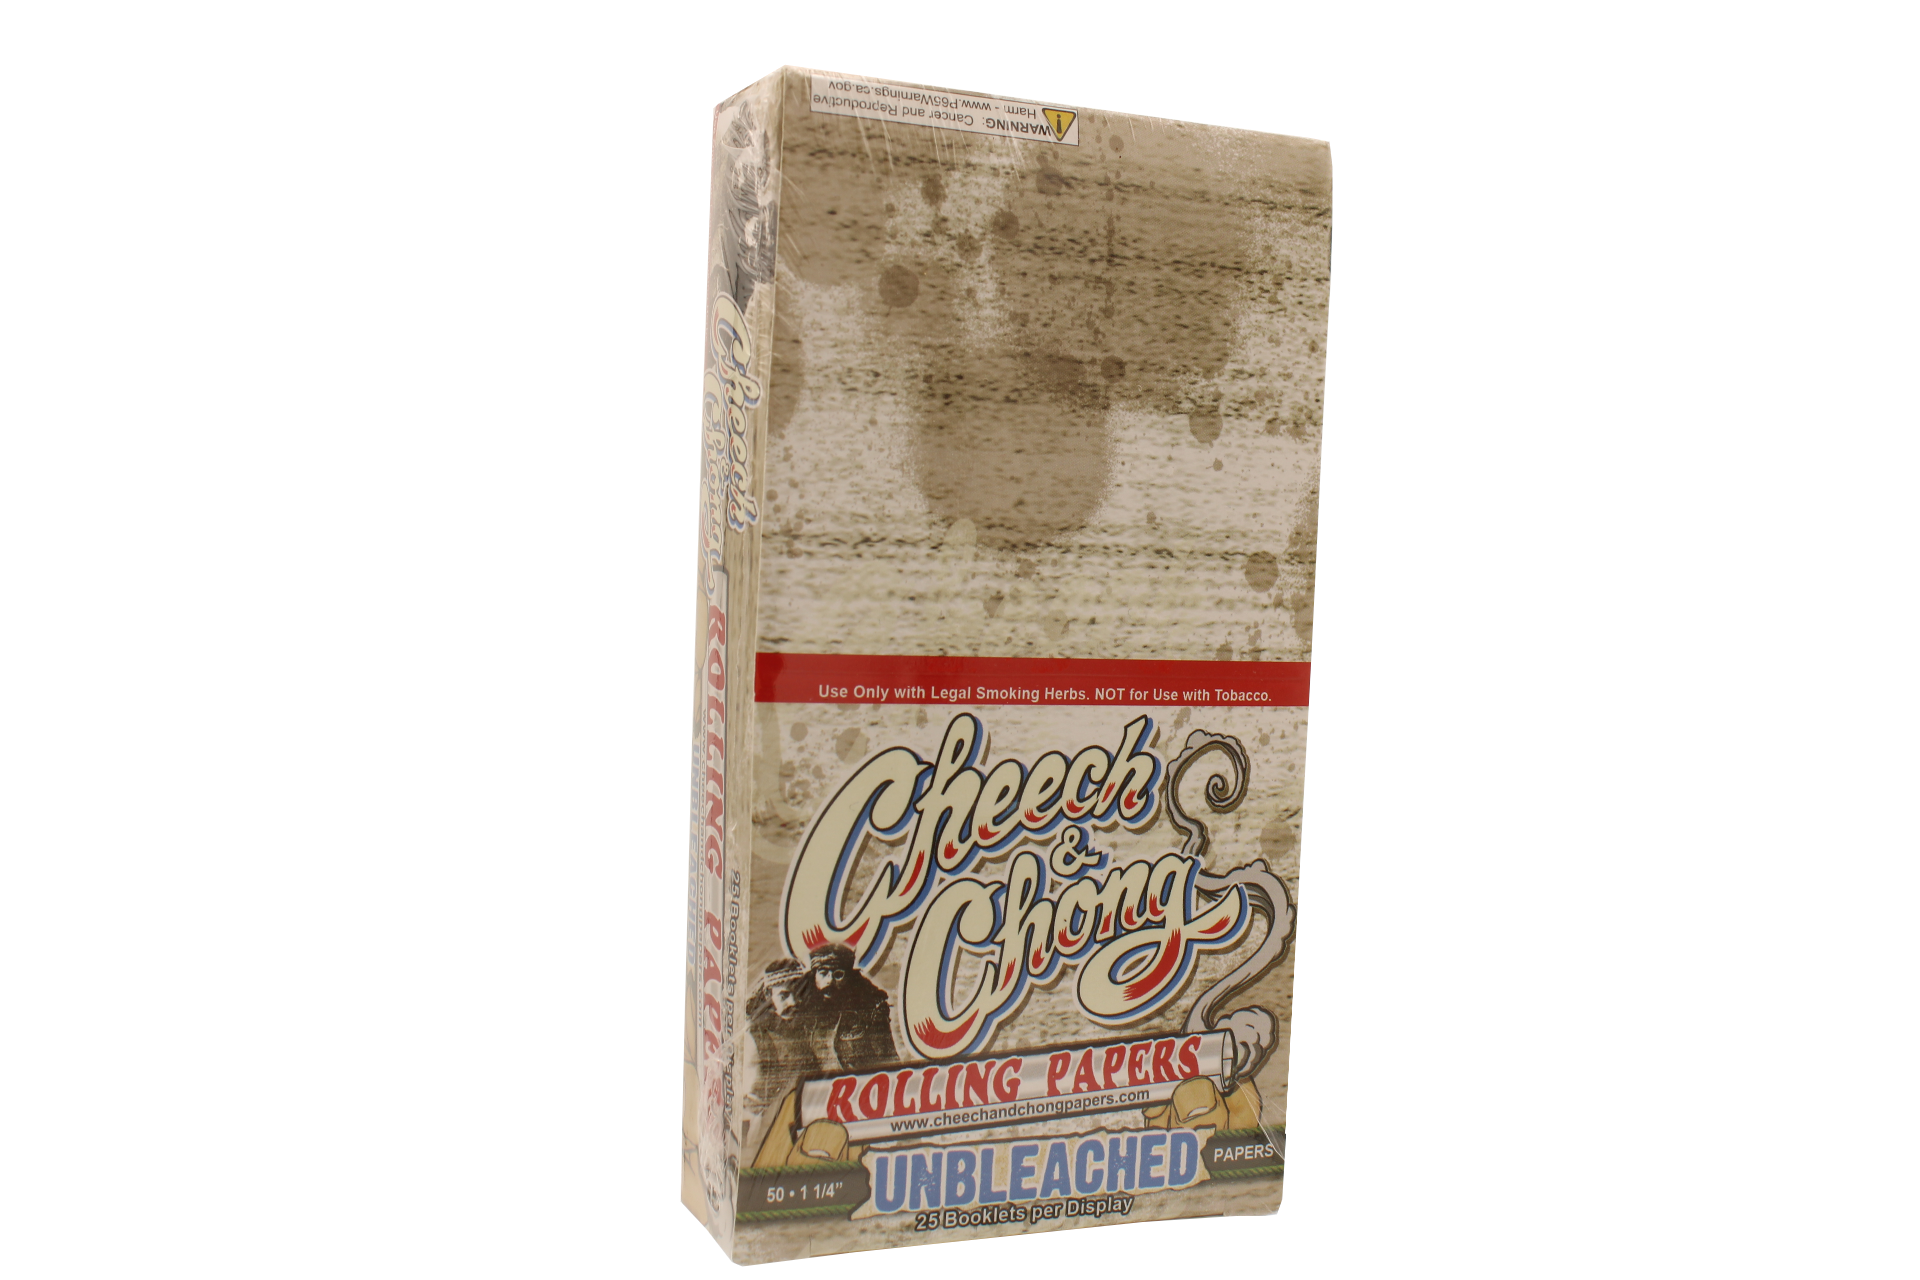 CHEECH AND CHONG UNBLEACHED ROLLING PAPERS - 1 1/4 SIZE